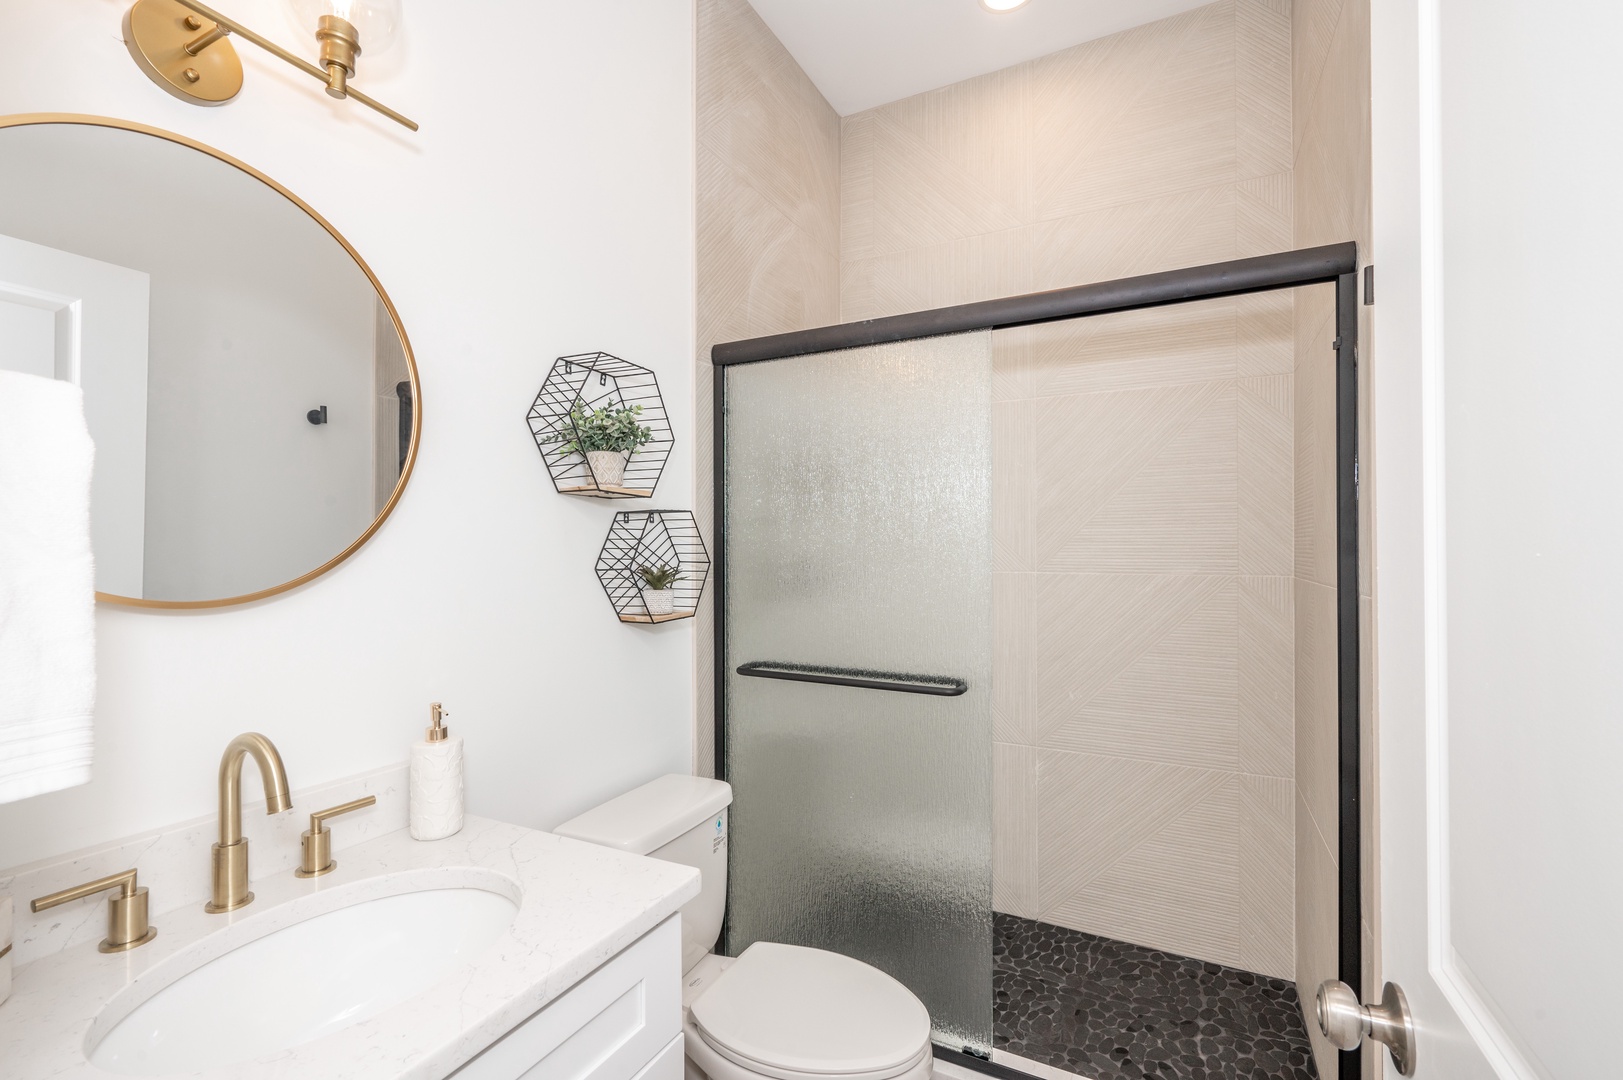 The bathroom offers a chic single vanity and spa-like glass shower